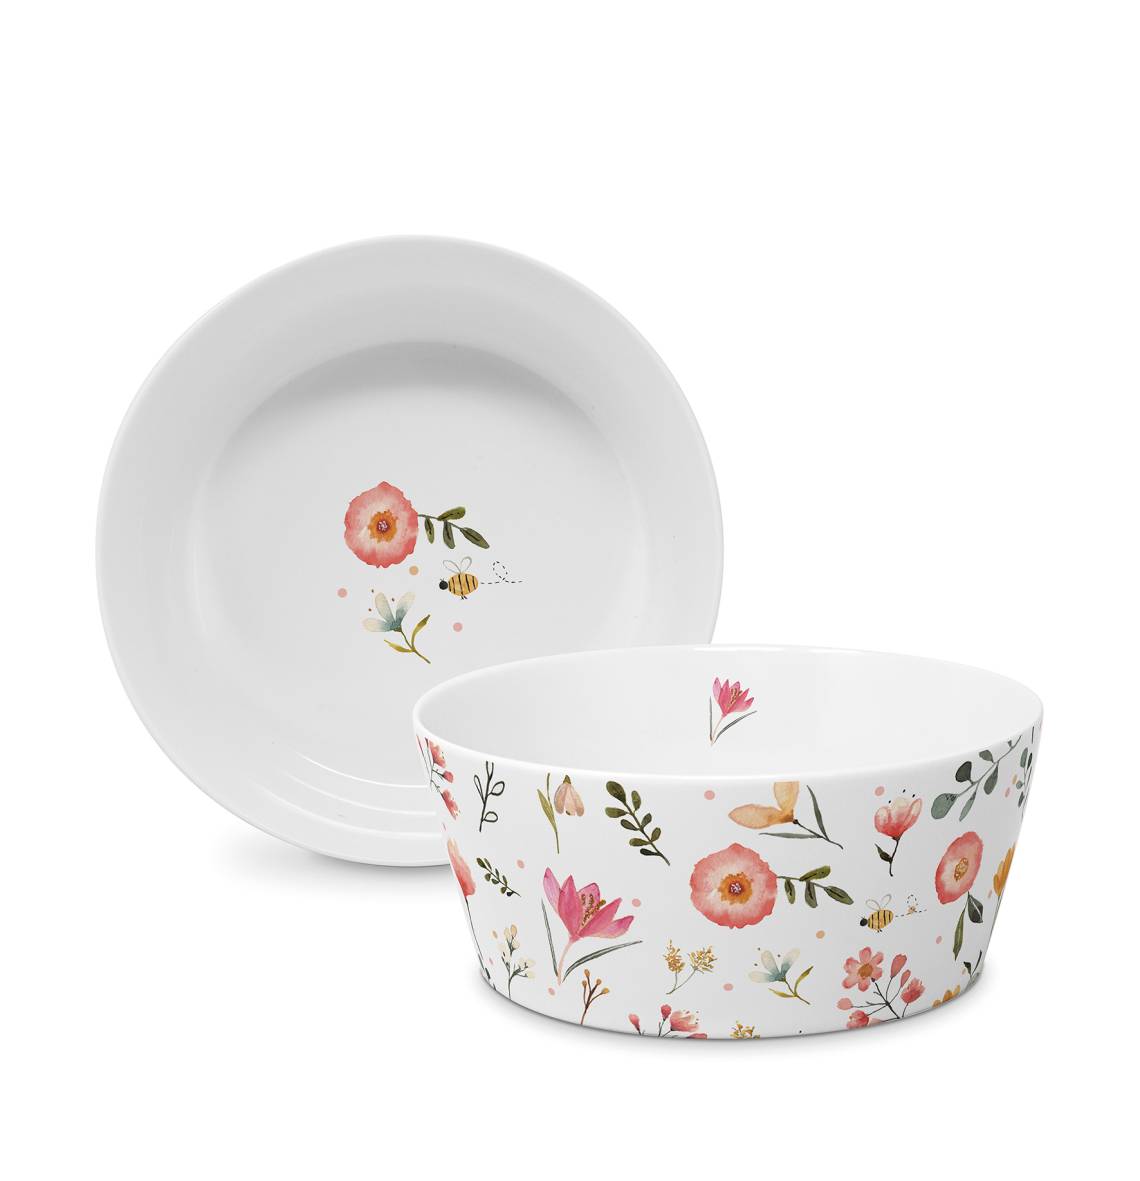 ppd - Oh Happy Day Trend Bowl